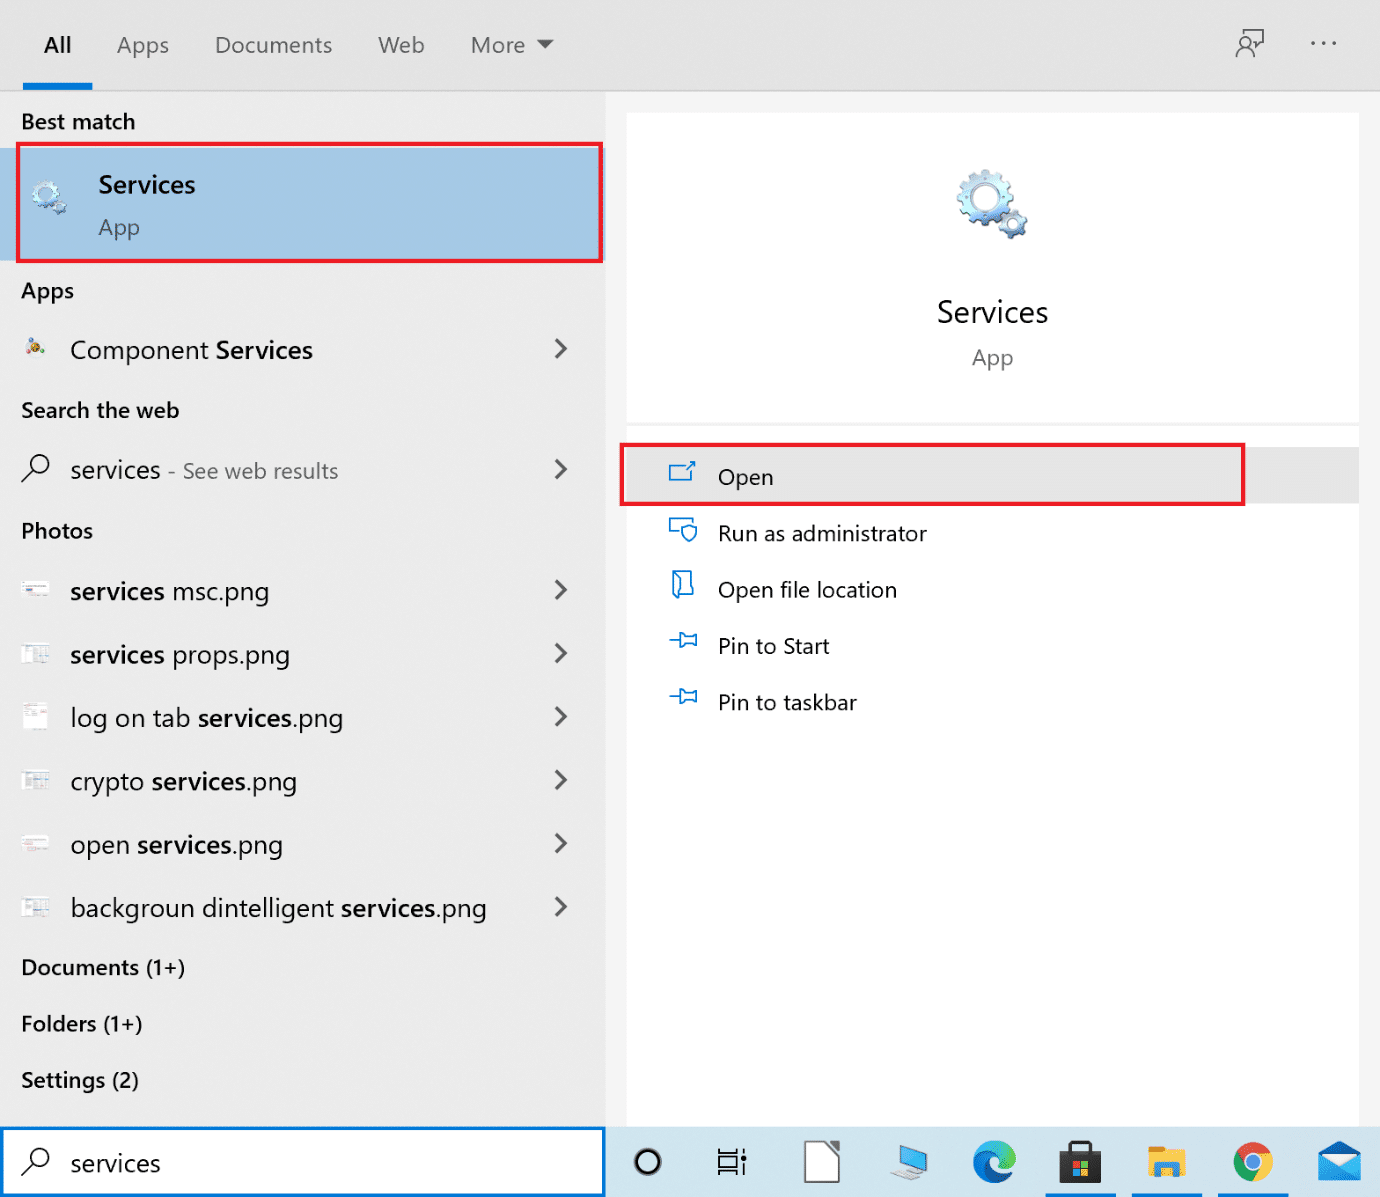 Launch Services app from windows search